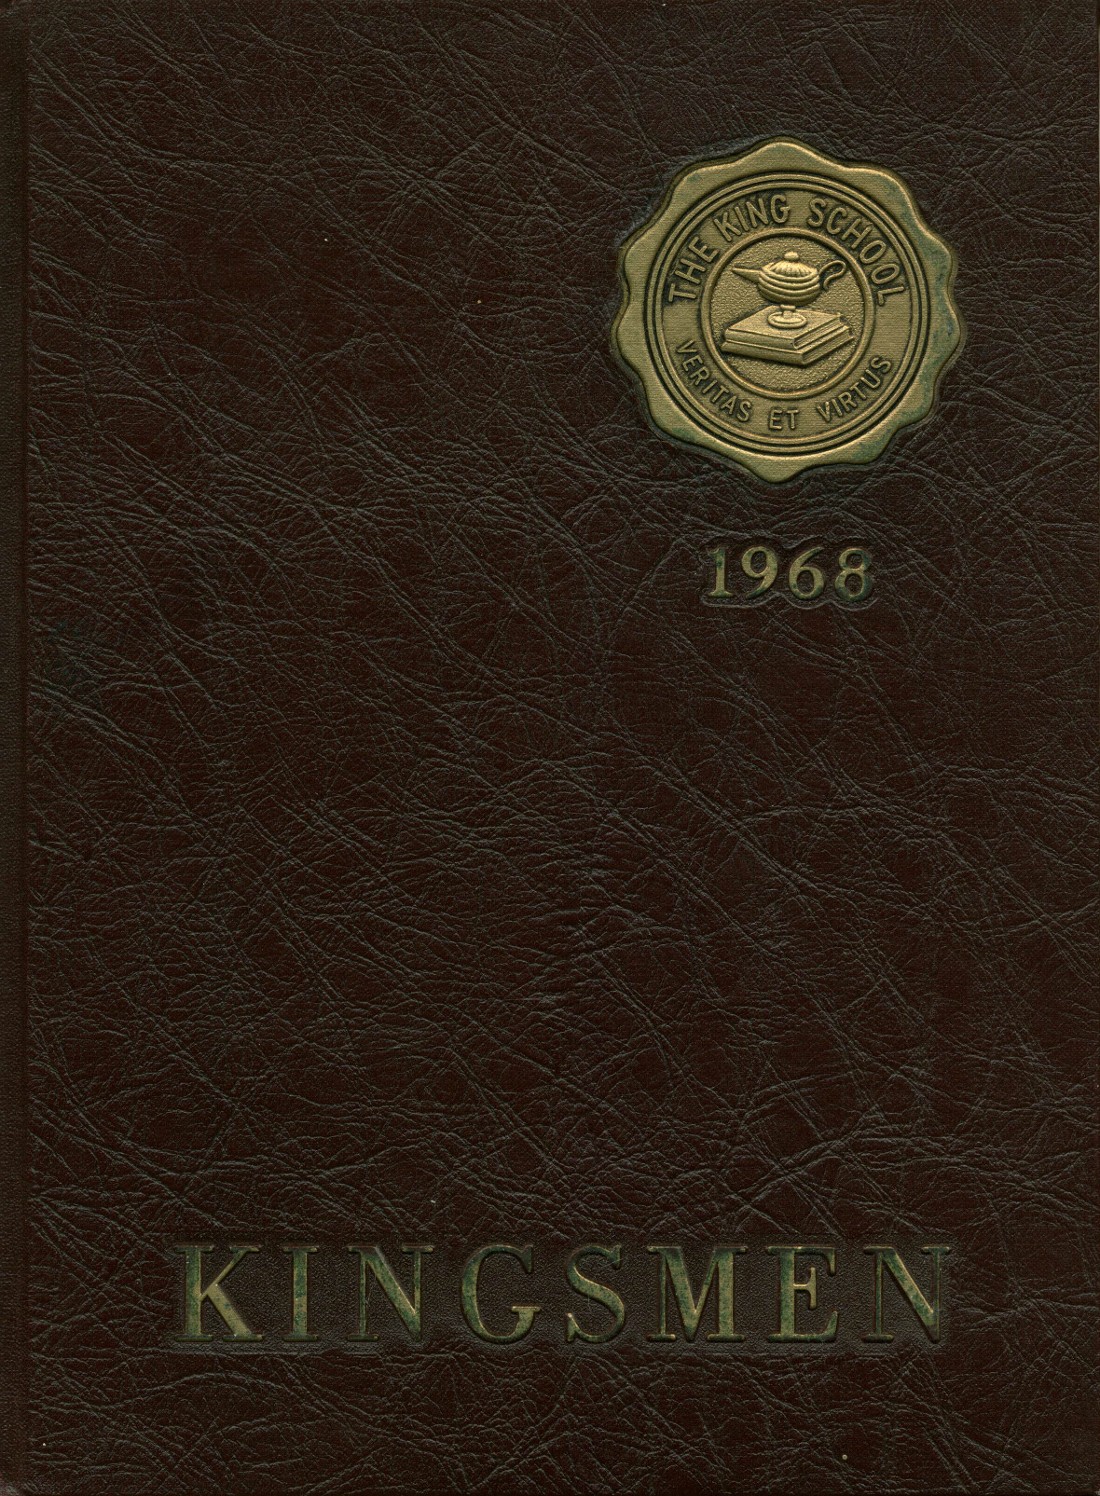 1968 yearbook from King/LowHeywood Thomas High School from Stamford